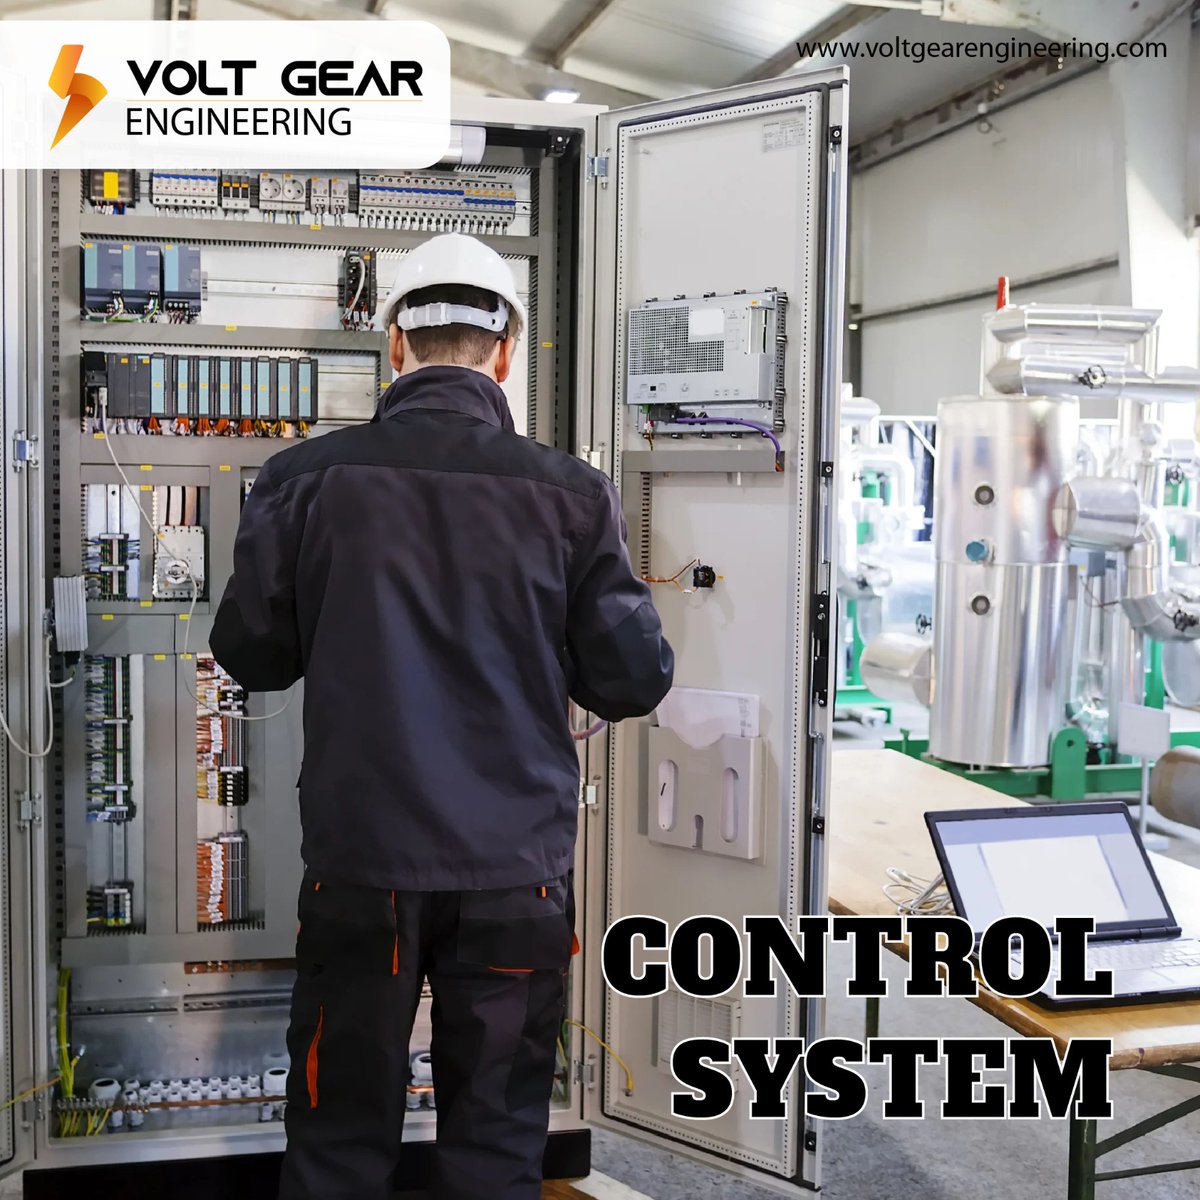 Master control systems for optimized operations and seamless performance. Elevate your business with precision control! 🛠️🌐
.
.
#controlsystem #voltgearengineering #PrecisionControl